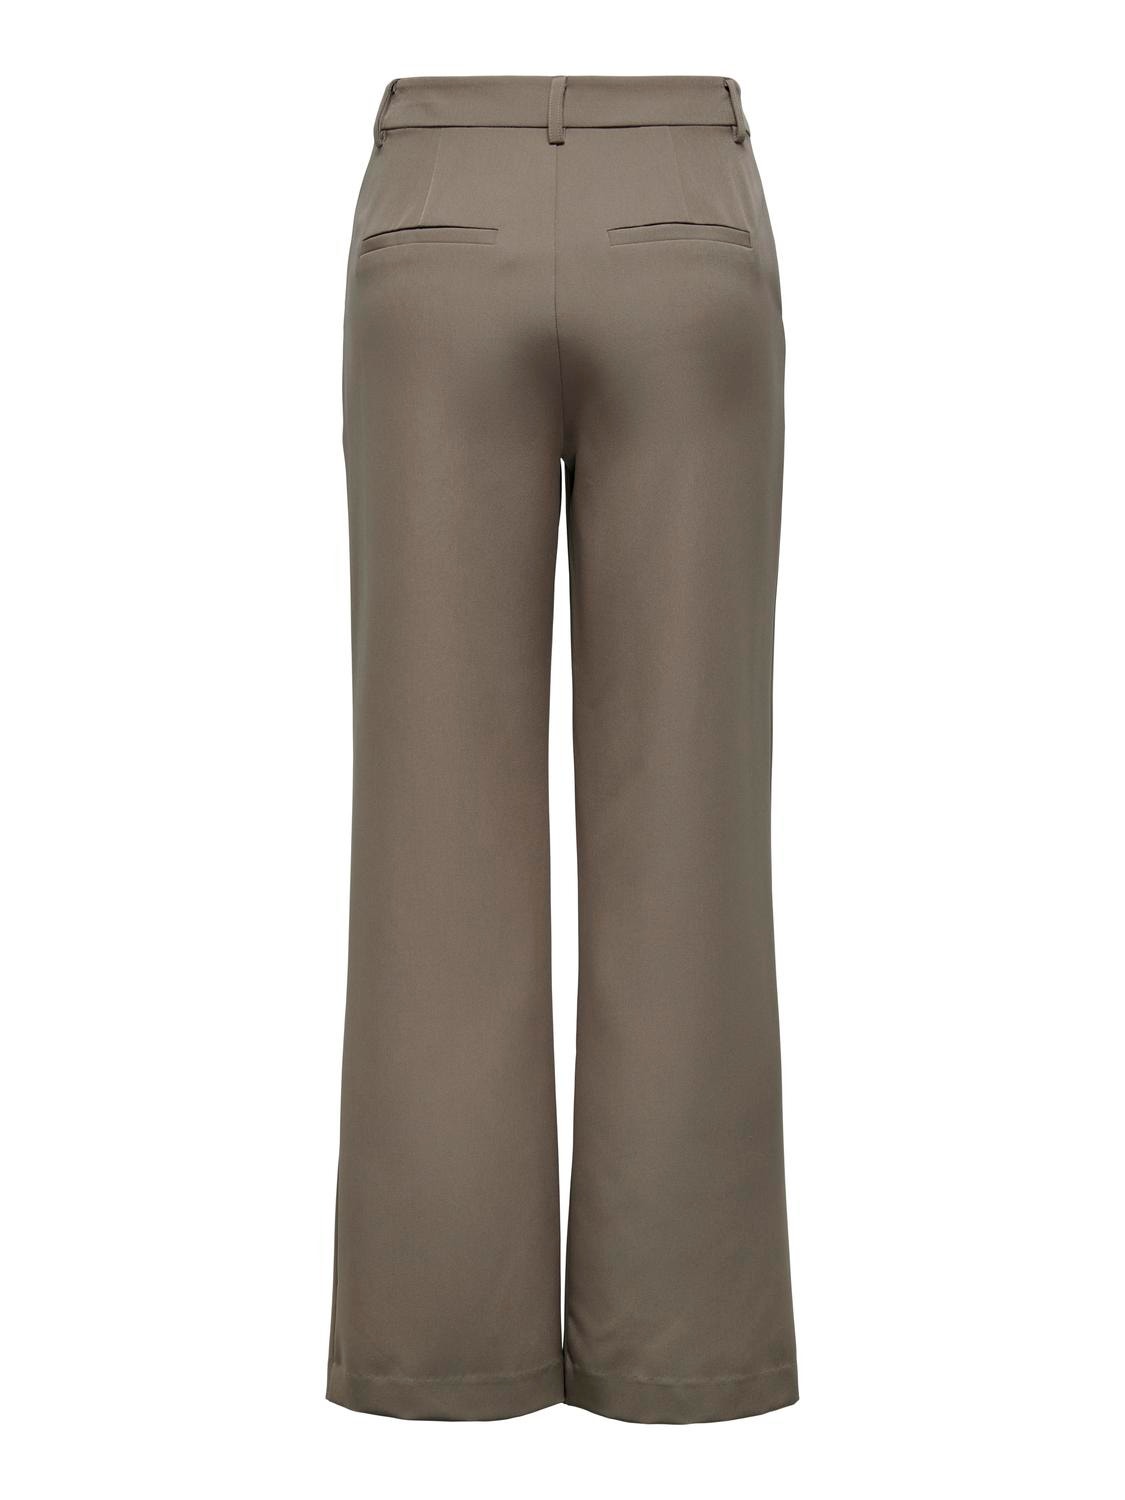 ONLY Highwaisted wide Trousers -Falcon - 15258191